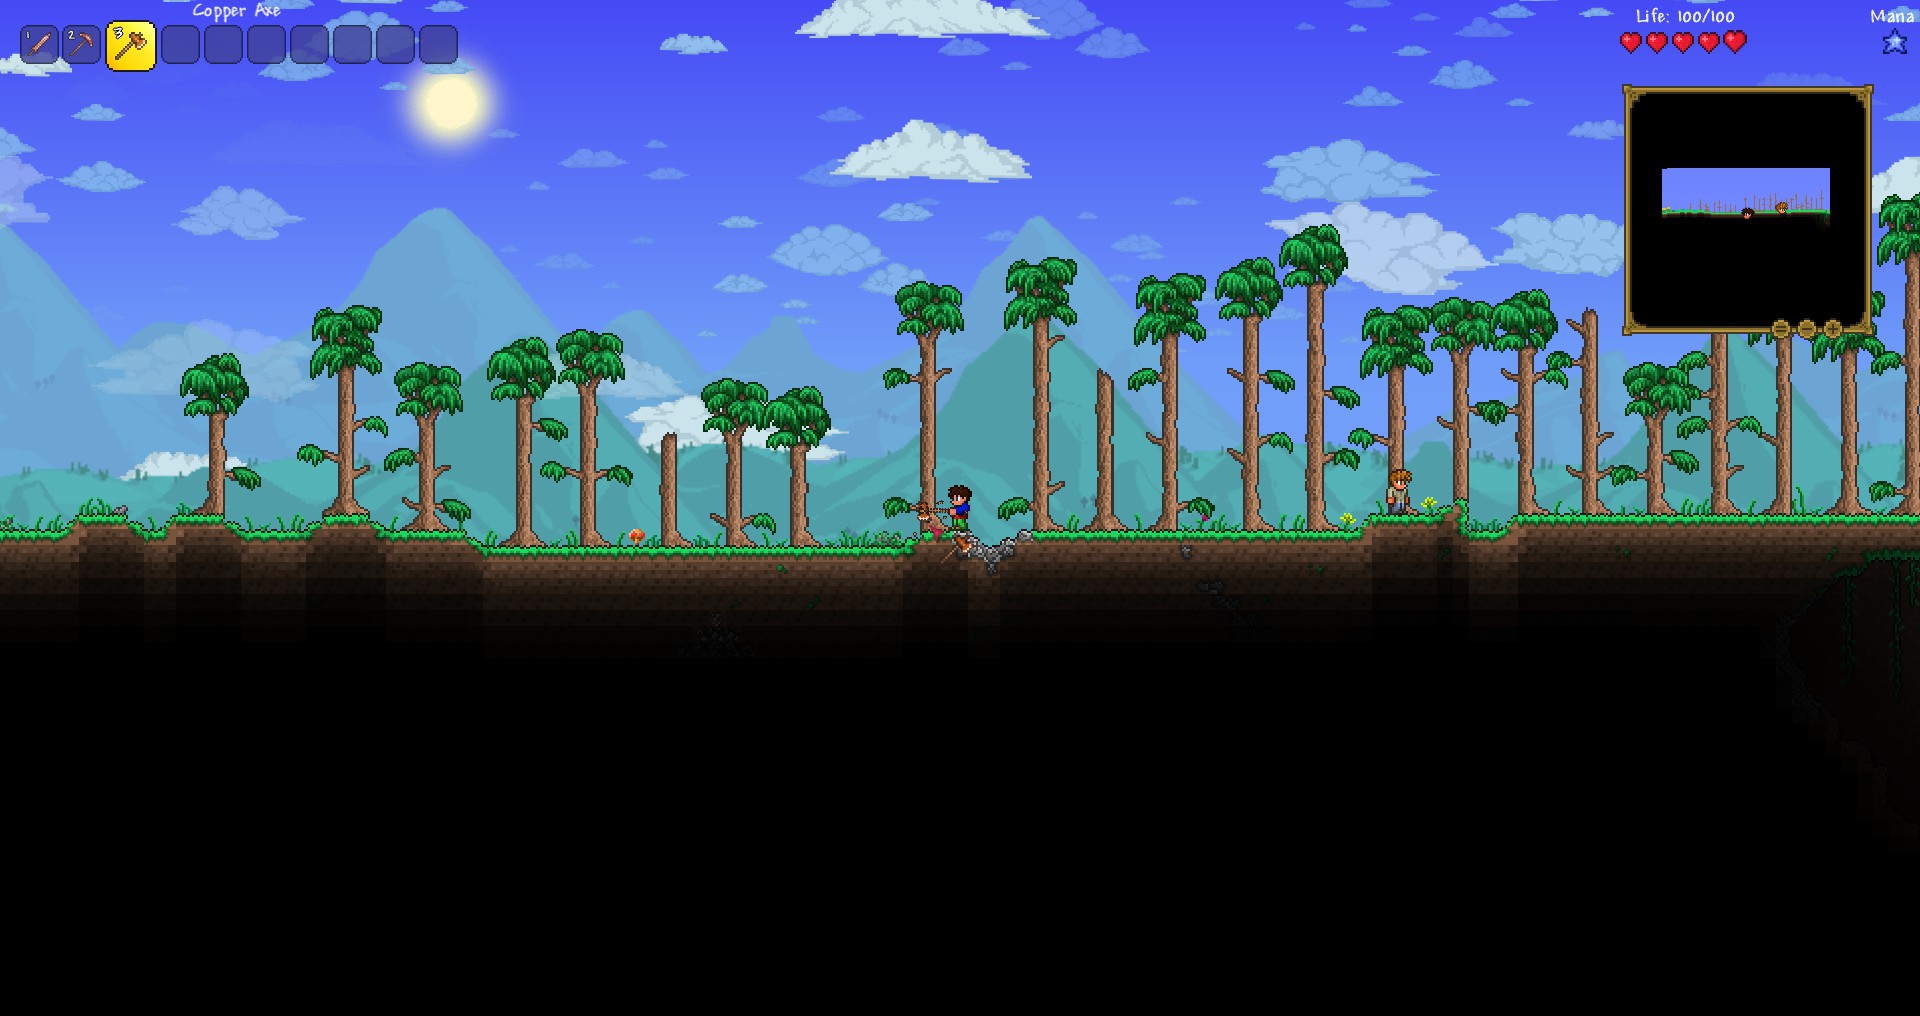 Steam Community :: Guide :: The Ultimate Guide to Terraria